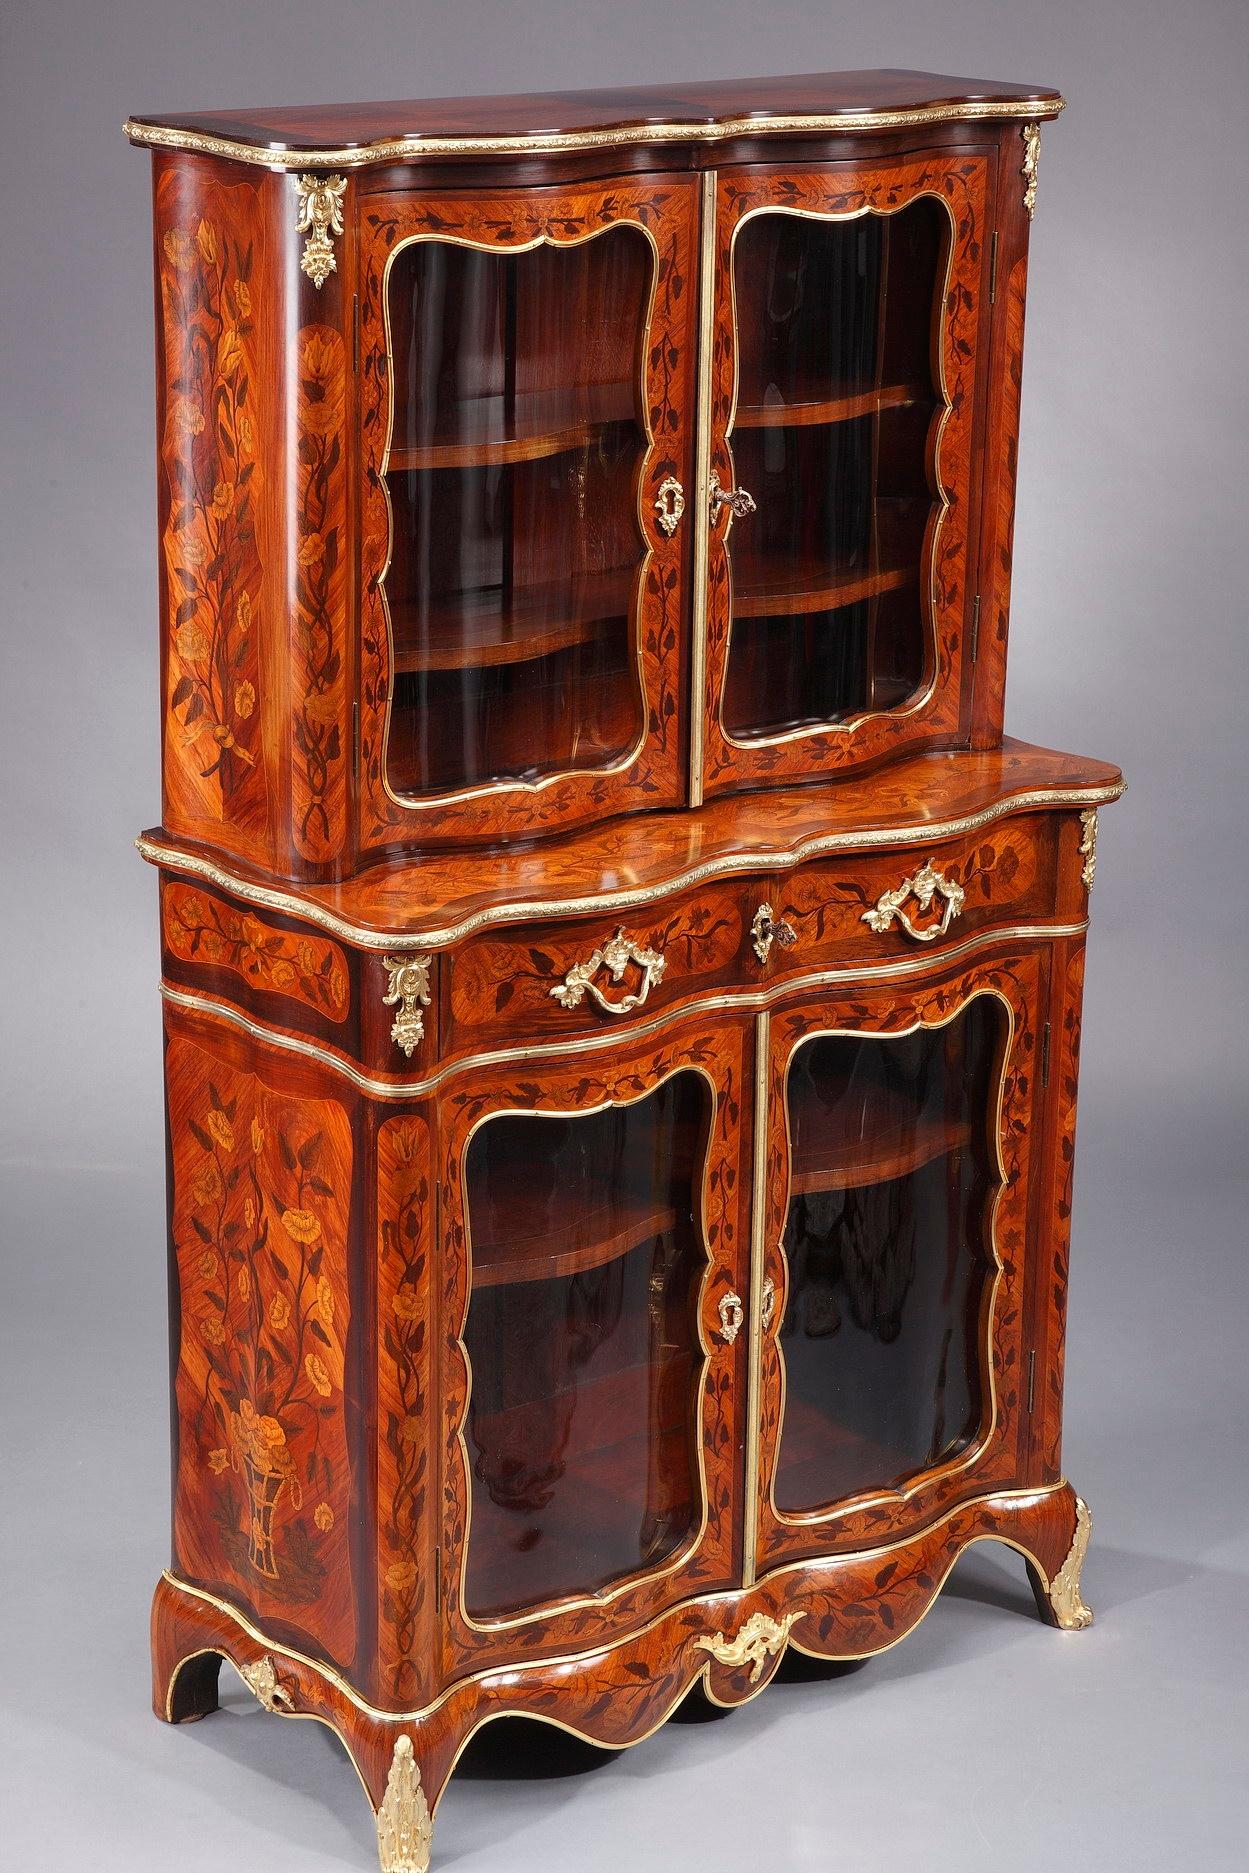 Louis XV-style vitrine crafted of veneered rosewood, amaranth and satinwood. Elegantly set upon cabriole legs, the showcase is distinguished by a luxurious marquetry decoration featuring floral pattern and vases. The satinwood is an exotic wood with